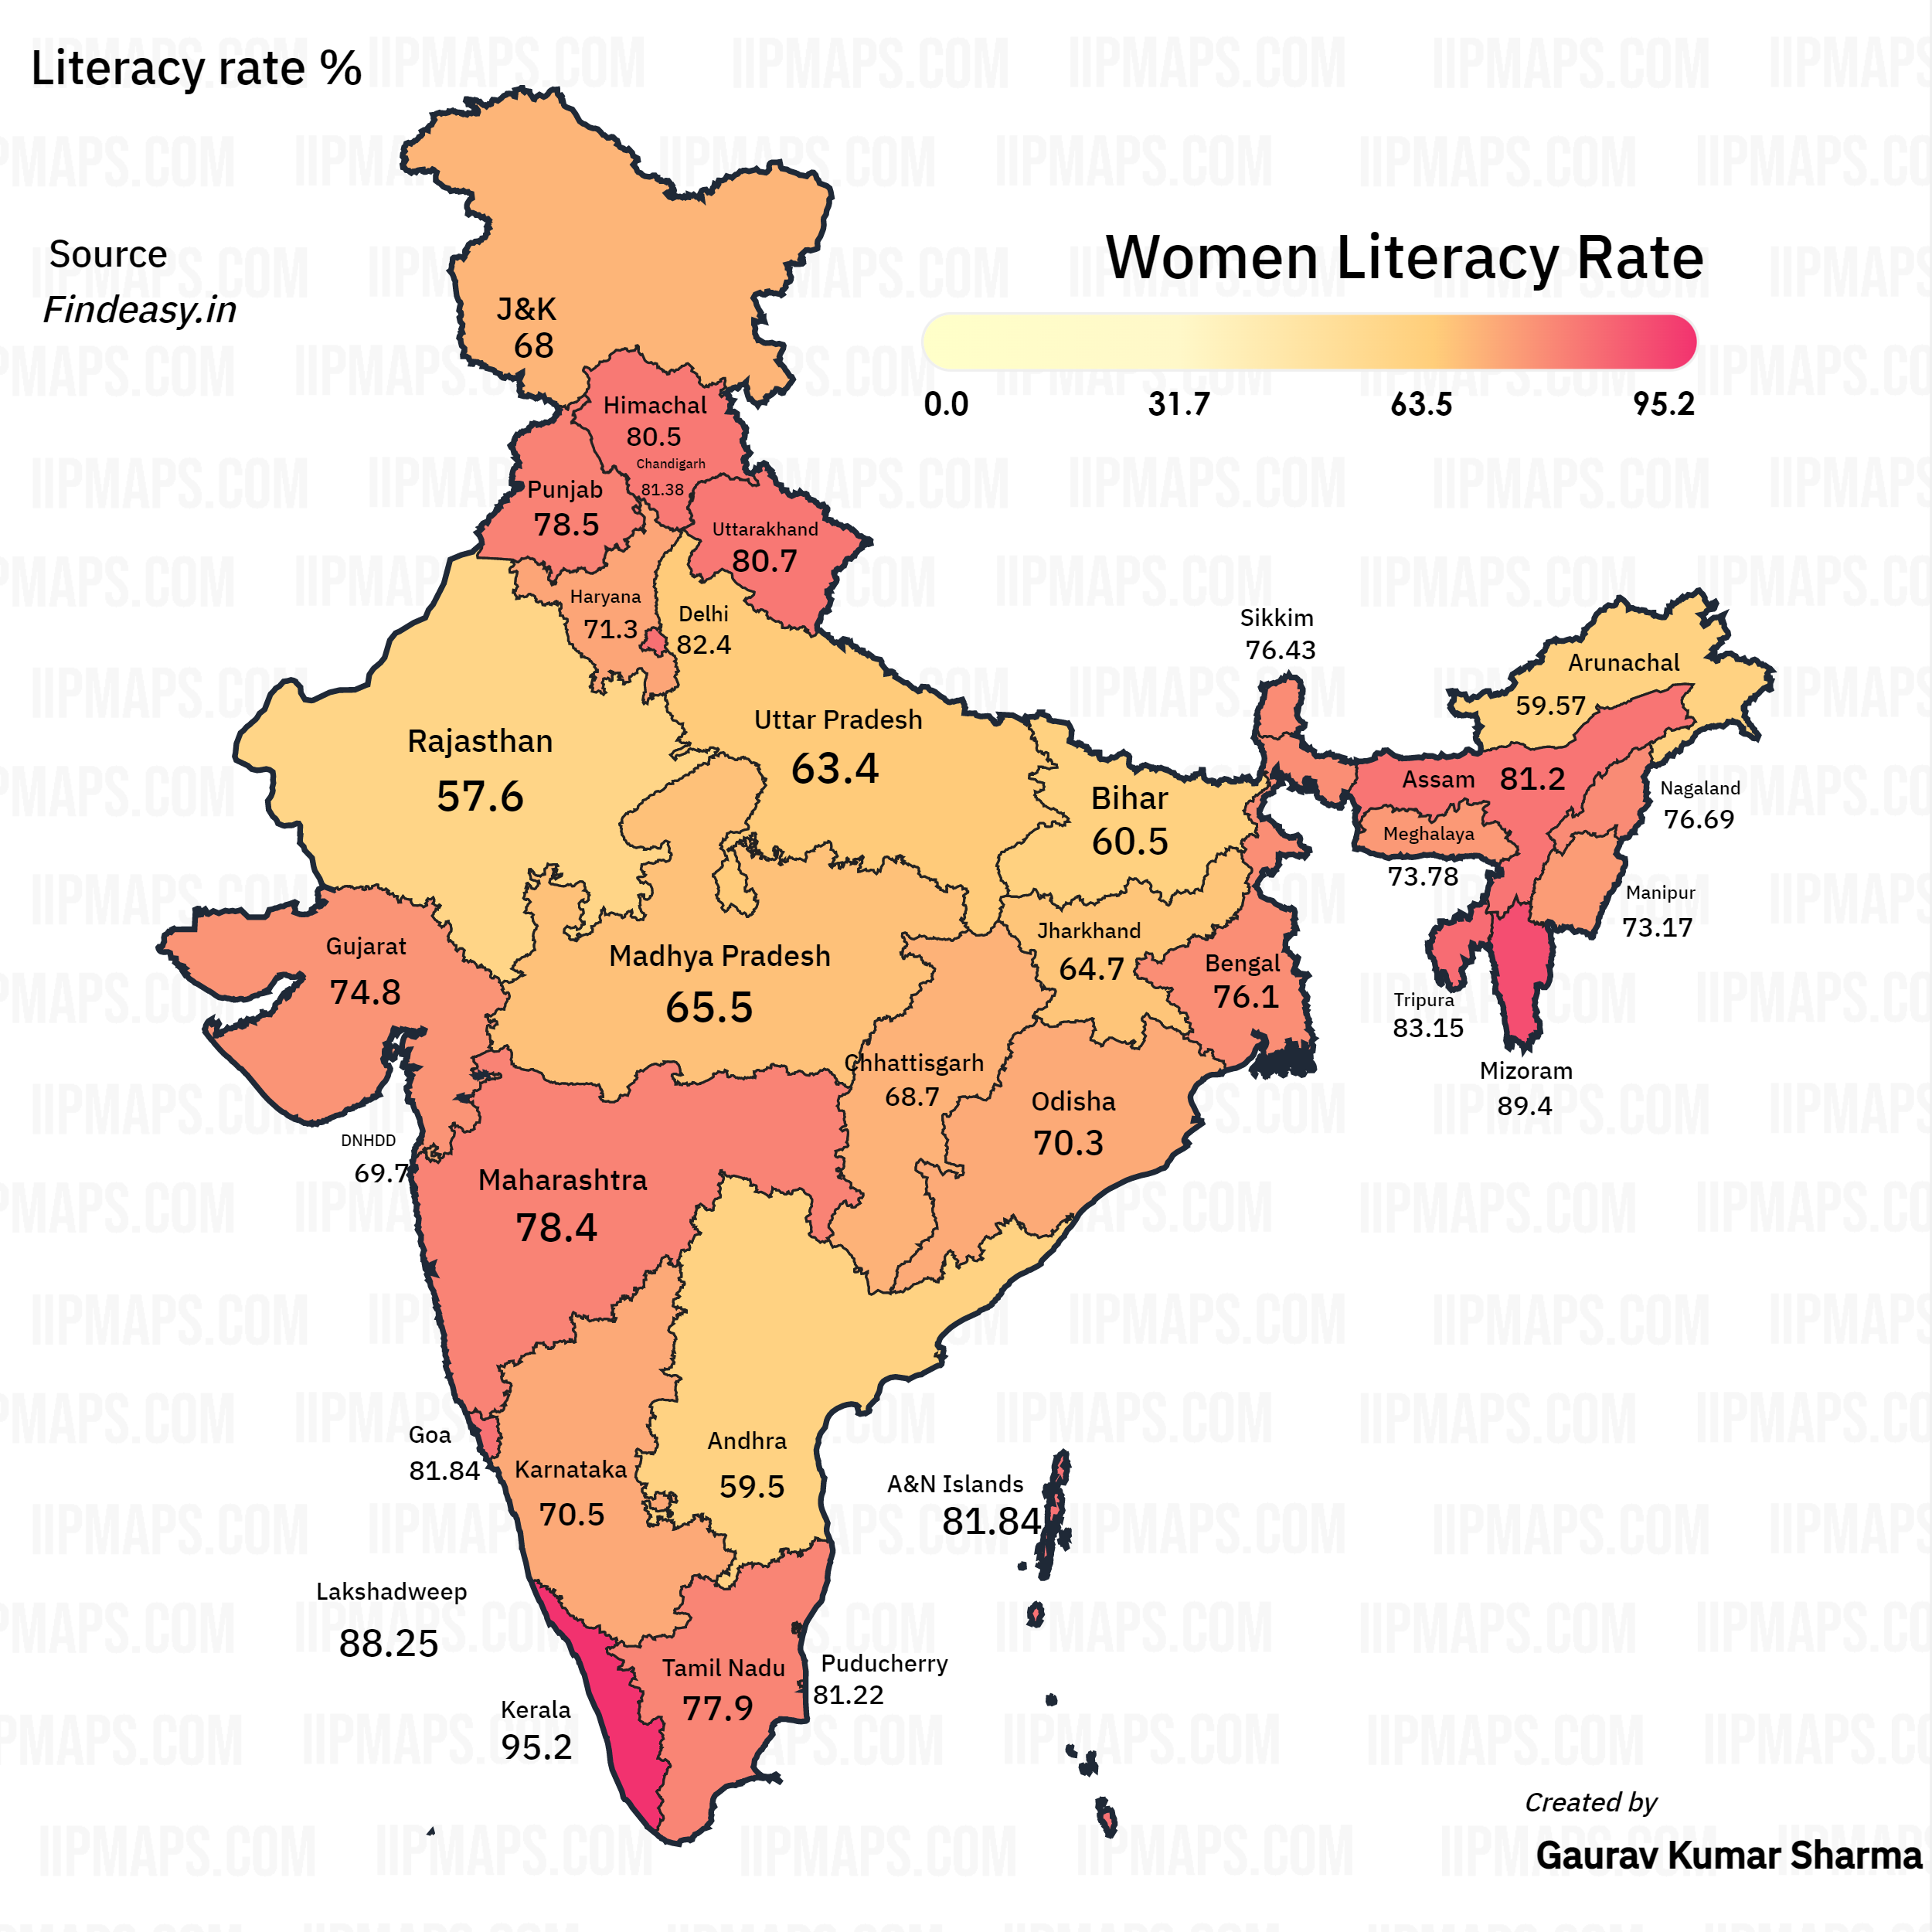 Literacy Rate